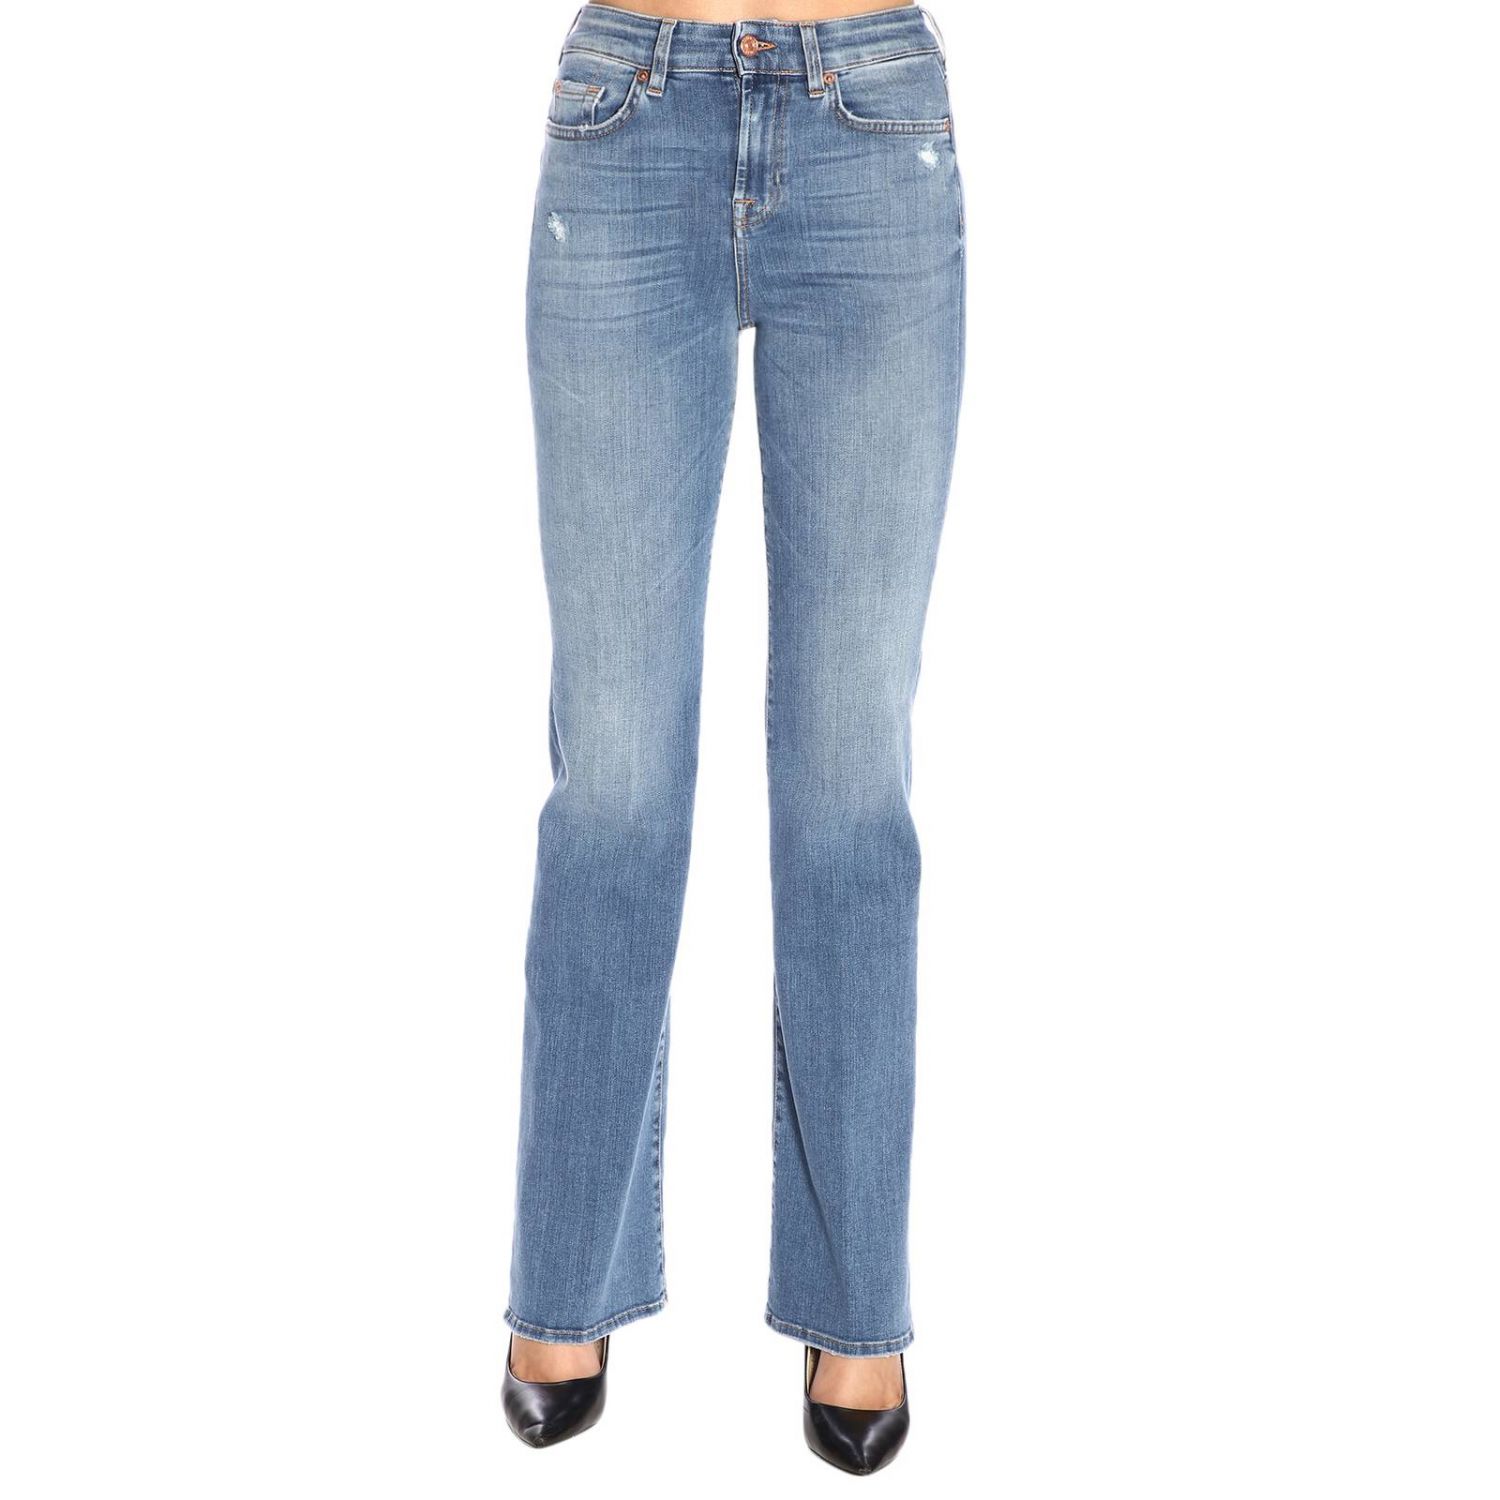 7 For All Mankind Outlet: jeans for women - Denim | 7 For All Mankind ...